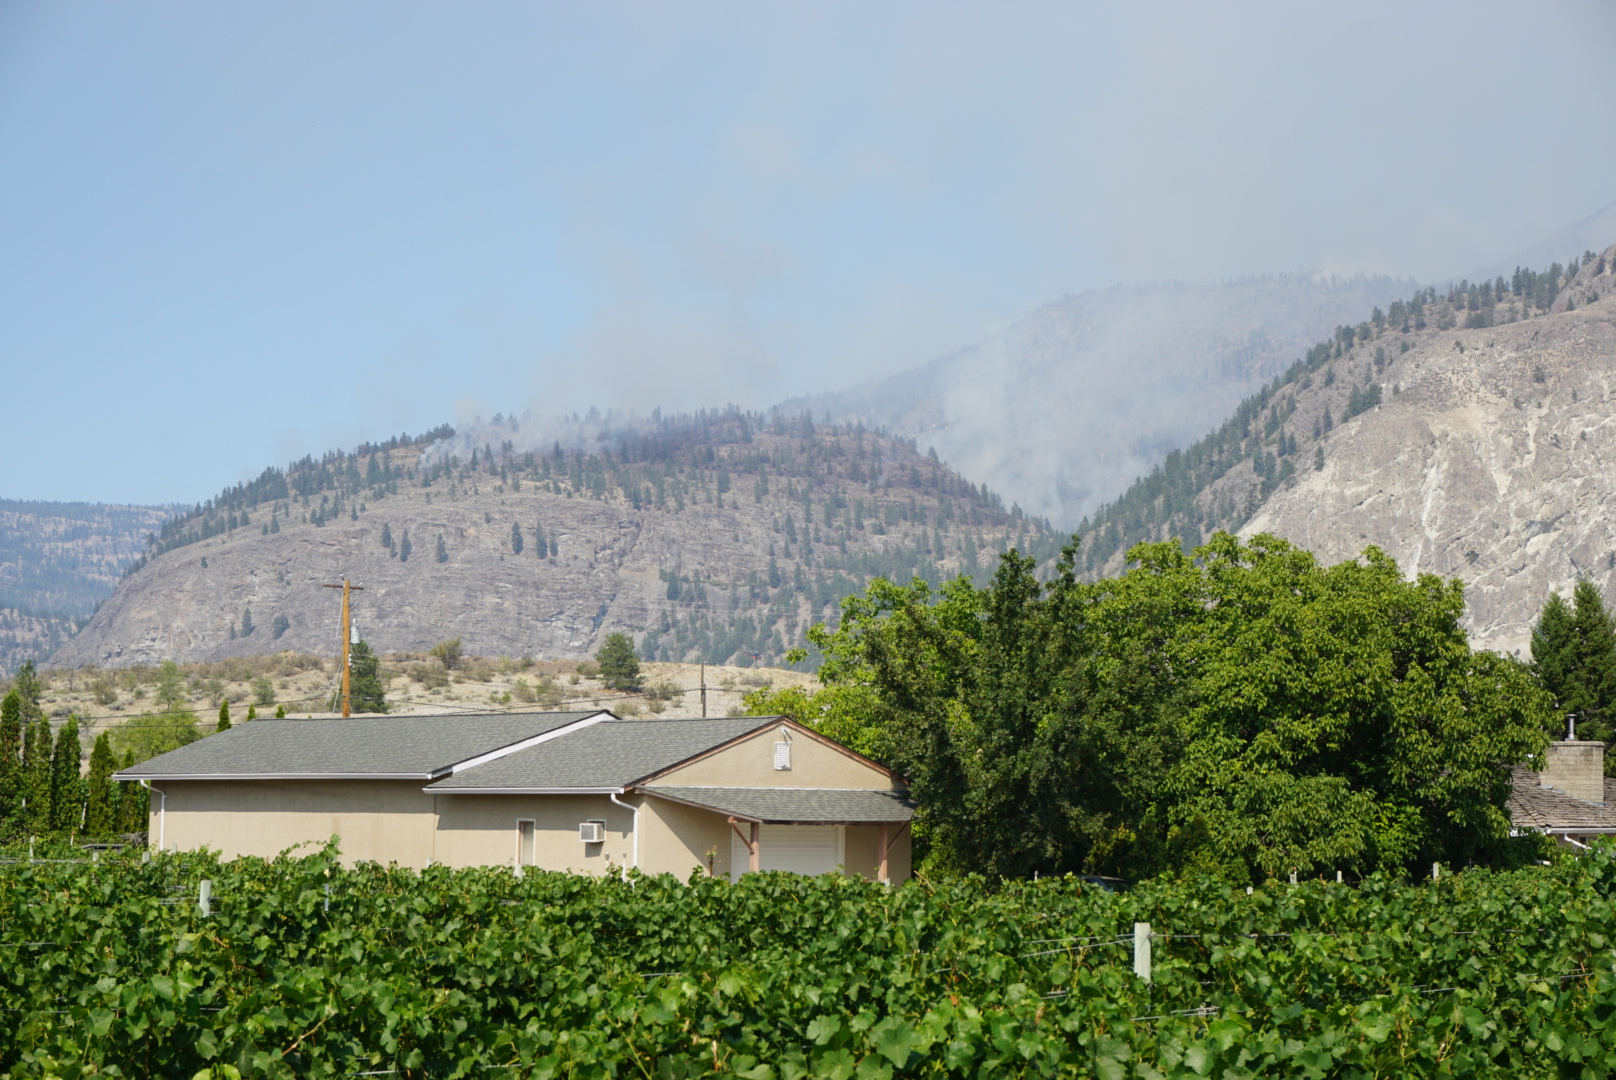 Wildfires and wine country—what should I know before my wine travel vacation?